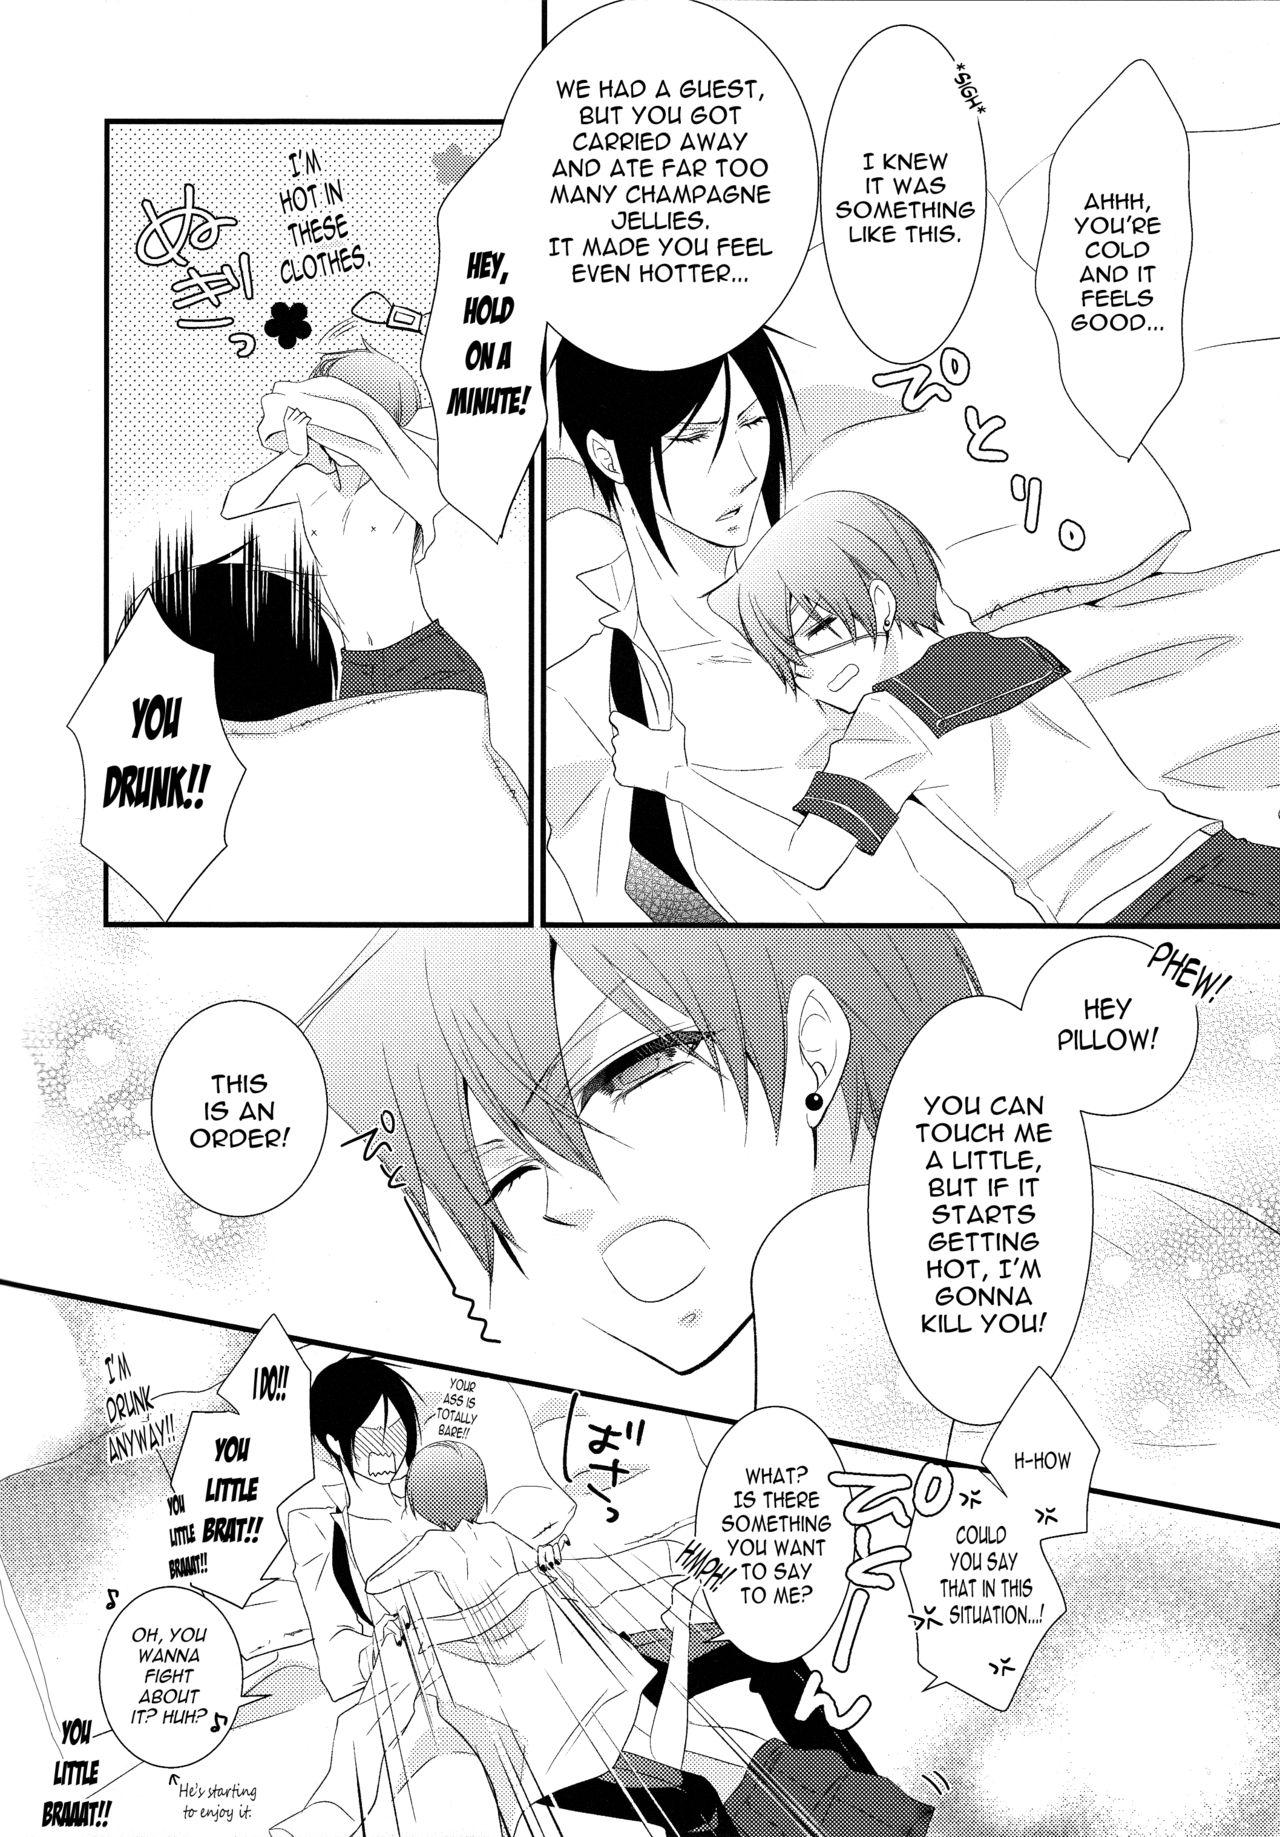 Pay C - Black butler Cuckold - Page 4